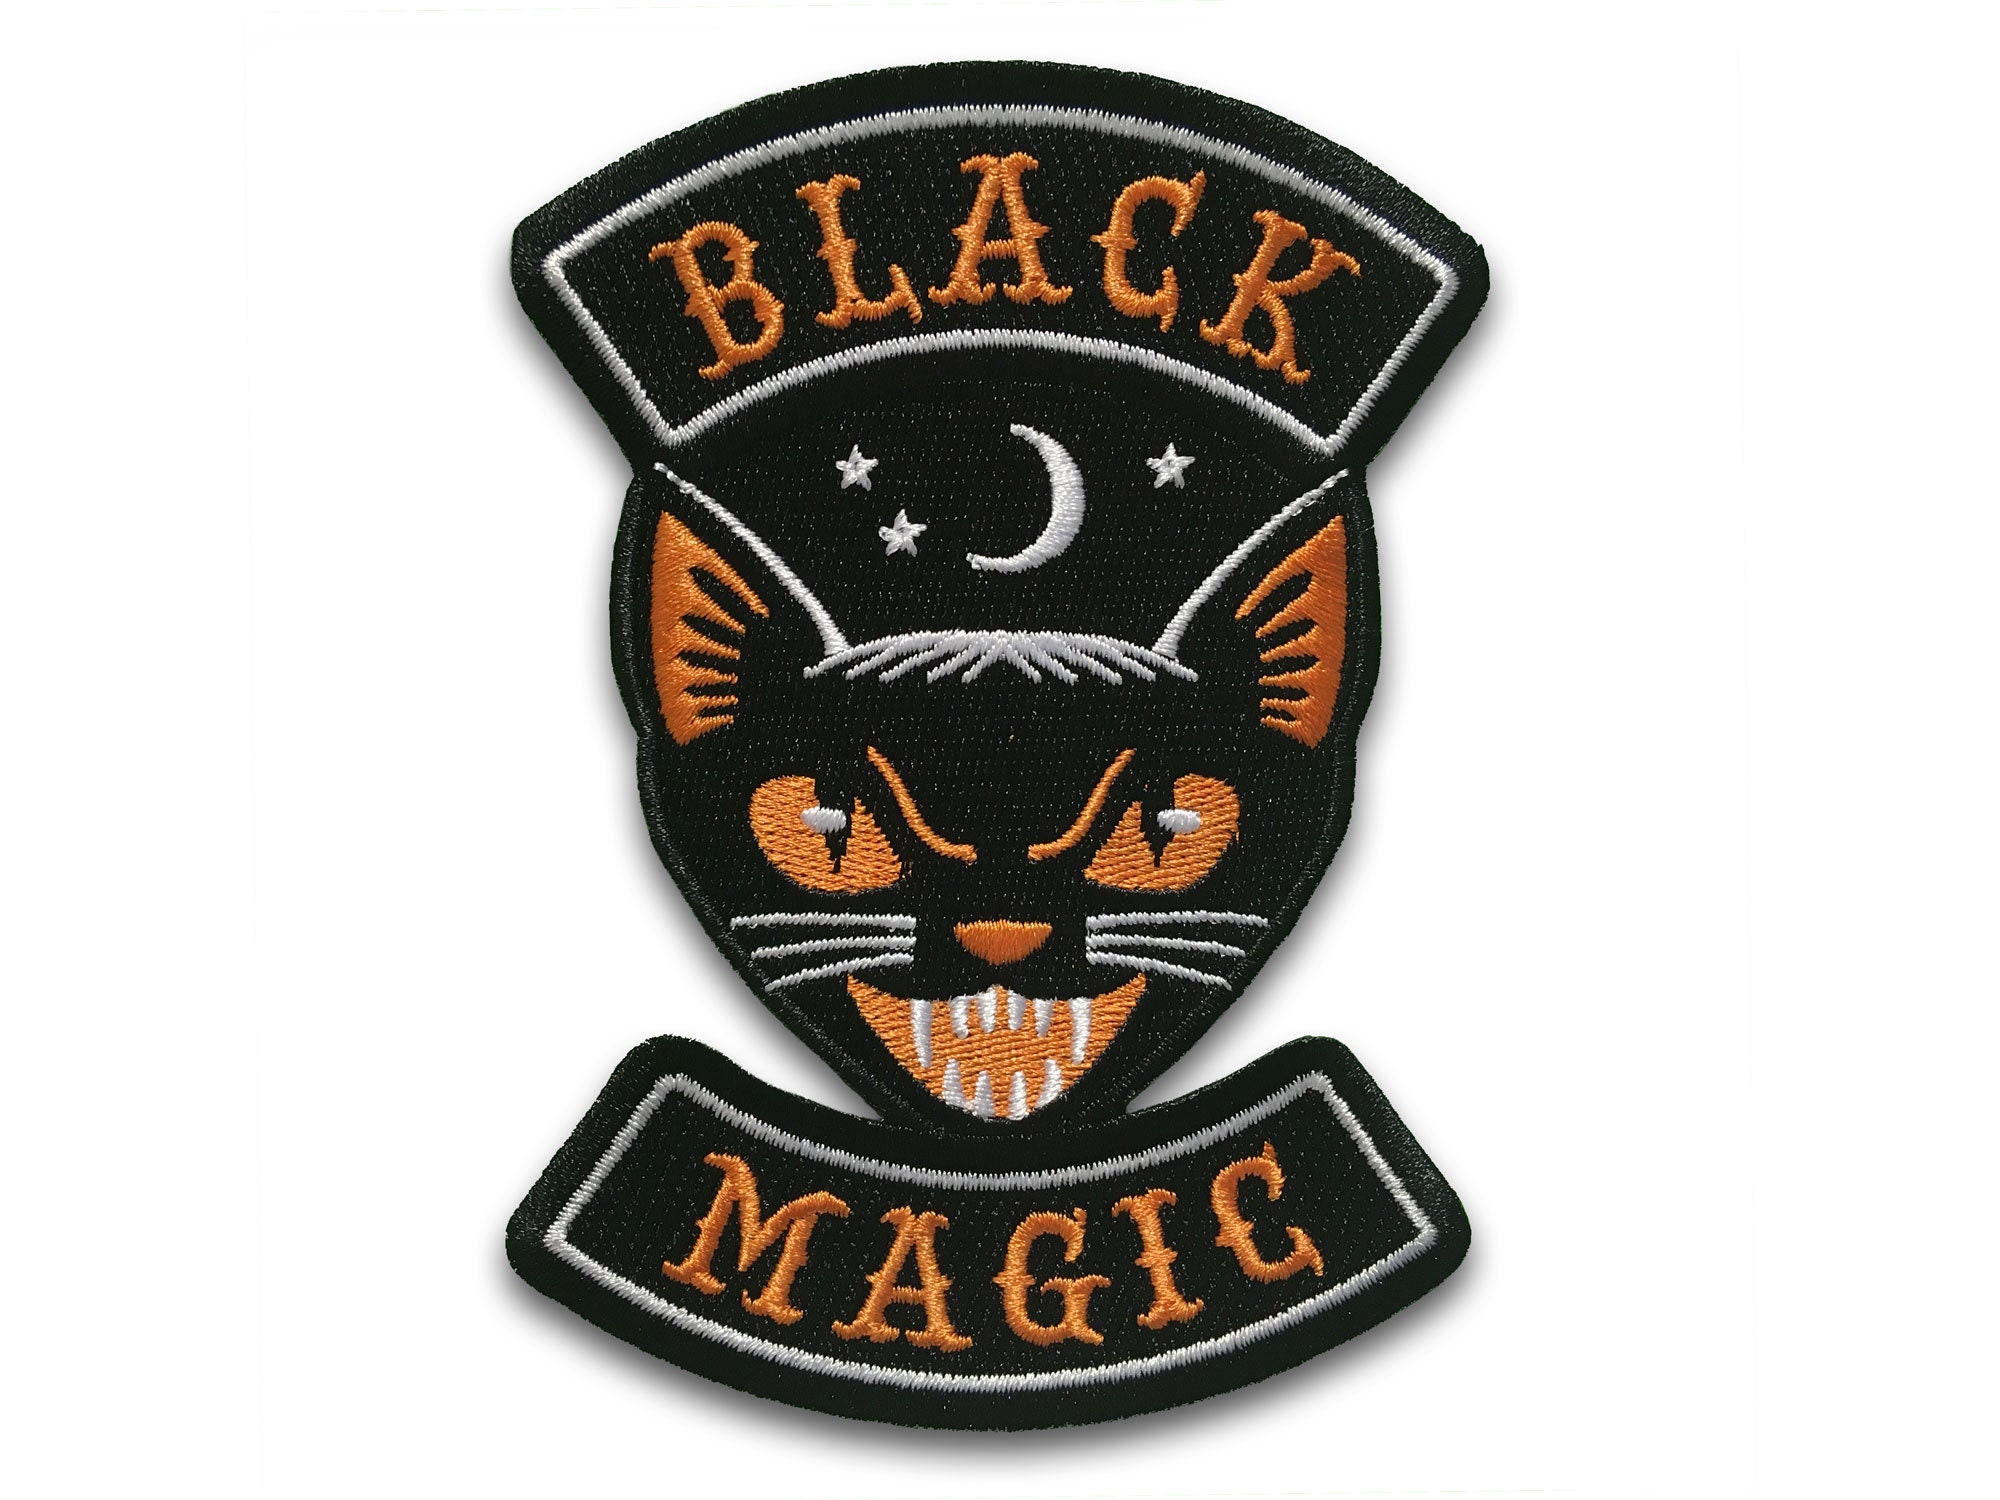 How to Find Cool and Trendy Custom Patches for Your Biker Clubs